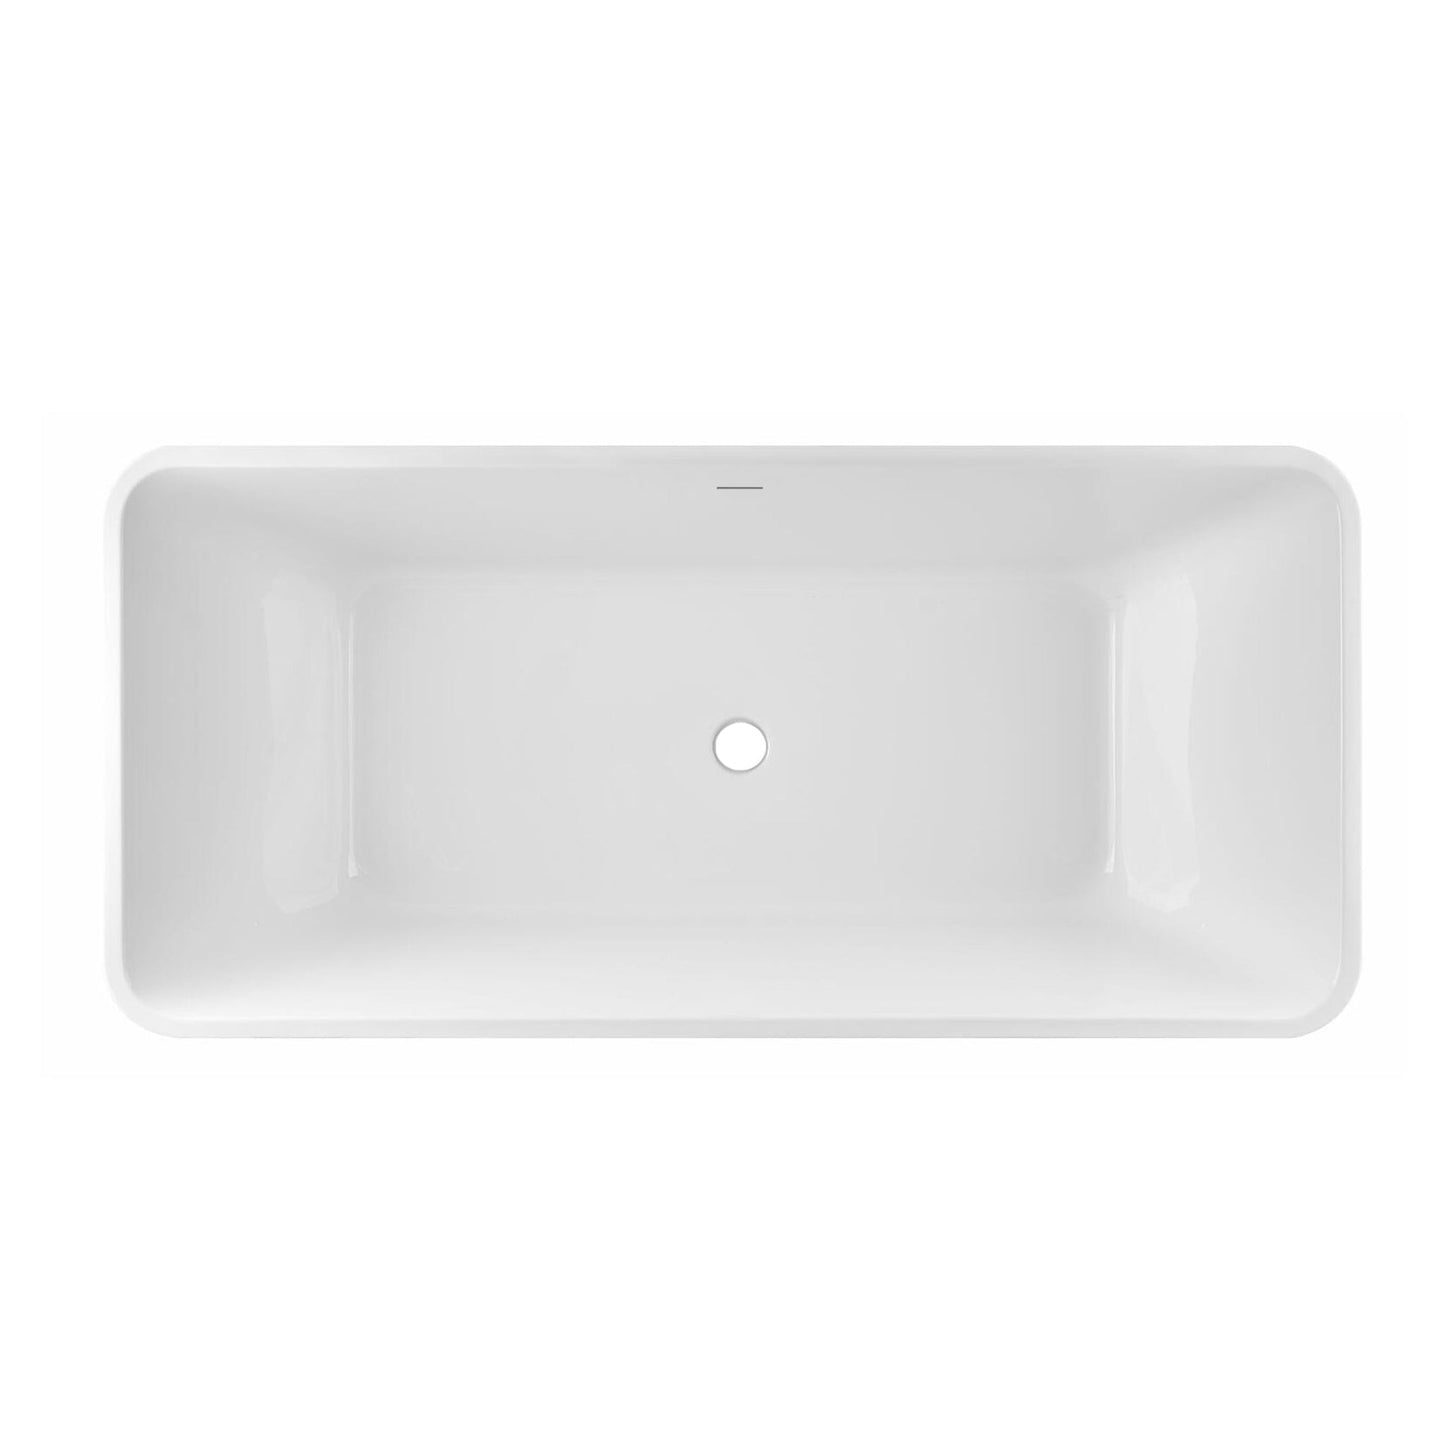 PULSE ShowerSpas 59" W x 30" D Polished White Acrylic Rectangular Freestanding Tub With Overflow and Stainless Steel Brackets